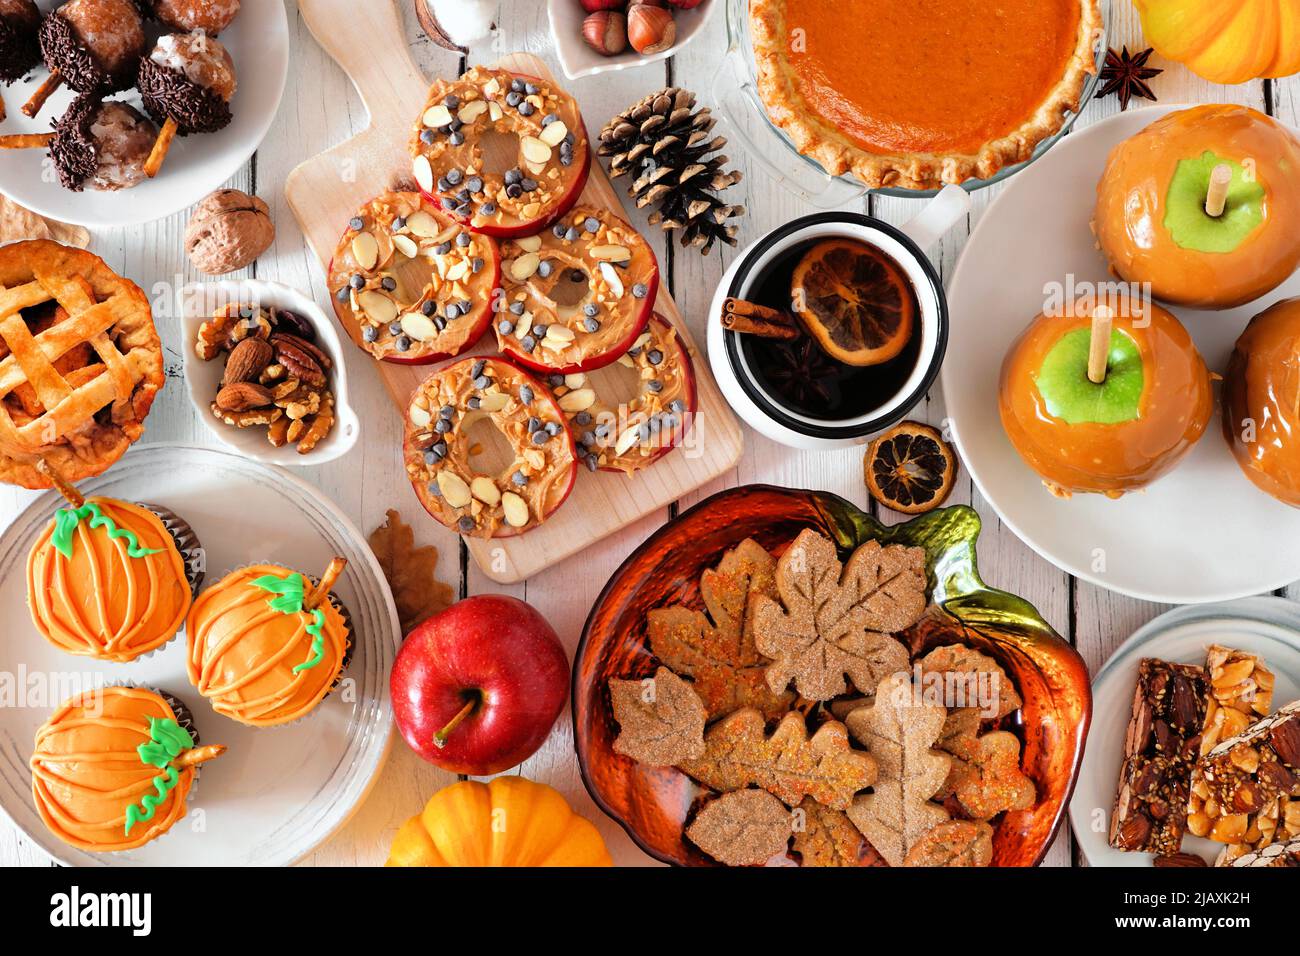 Autumn desserts table scene with various sweet fall treats. Top view over a white wood background. Stock Photo